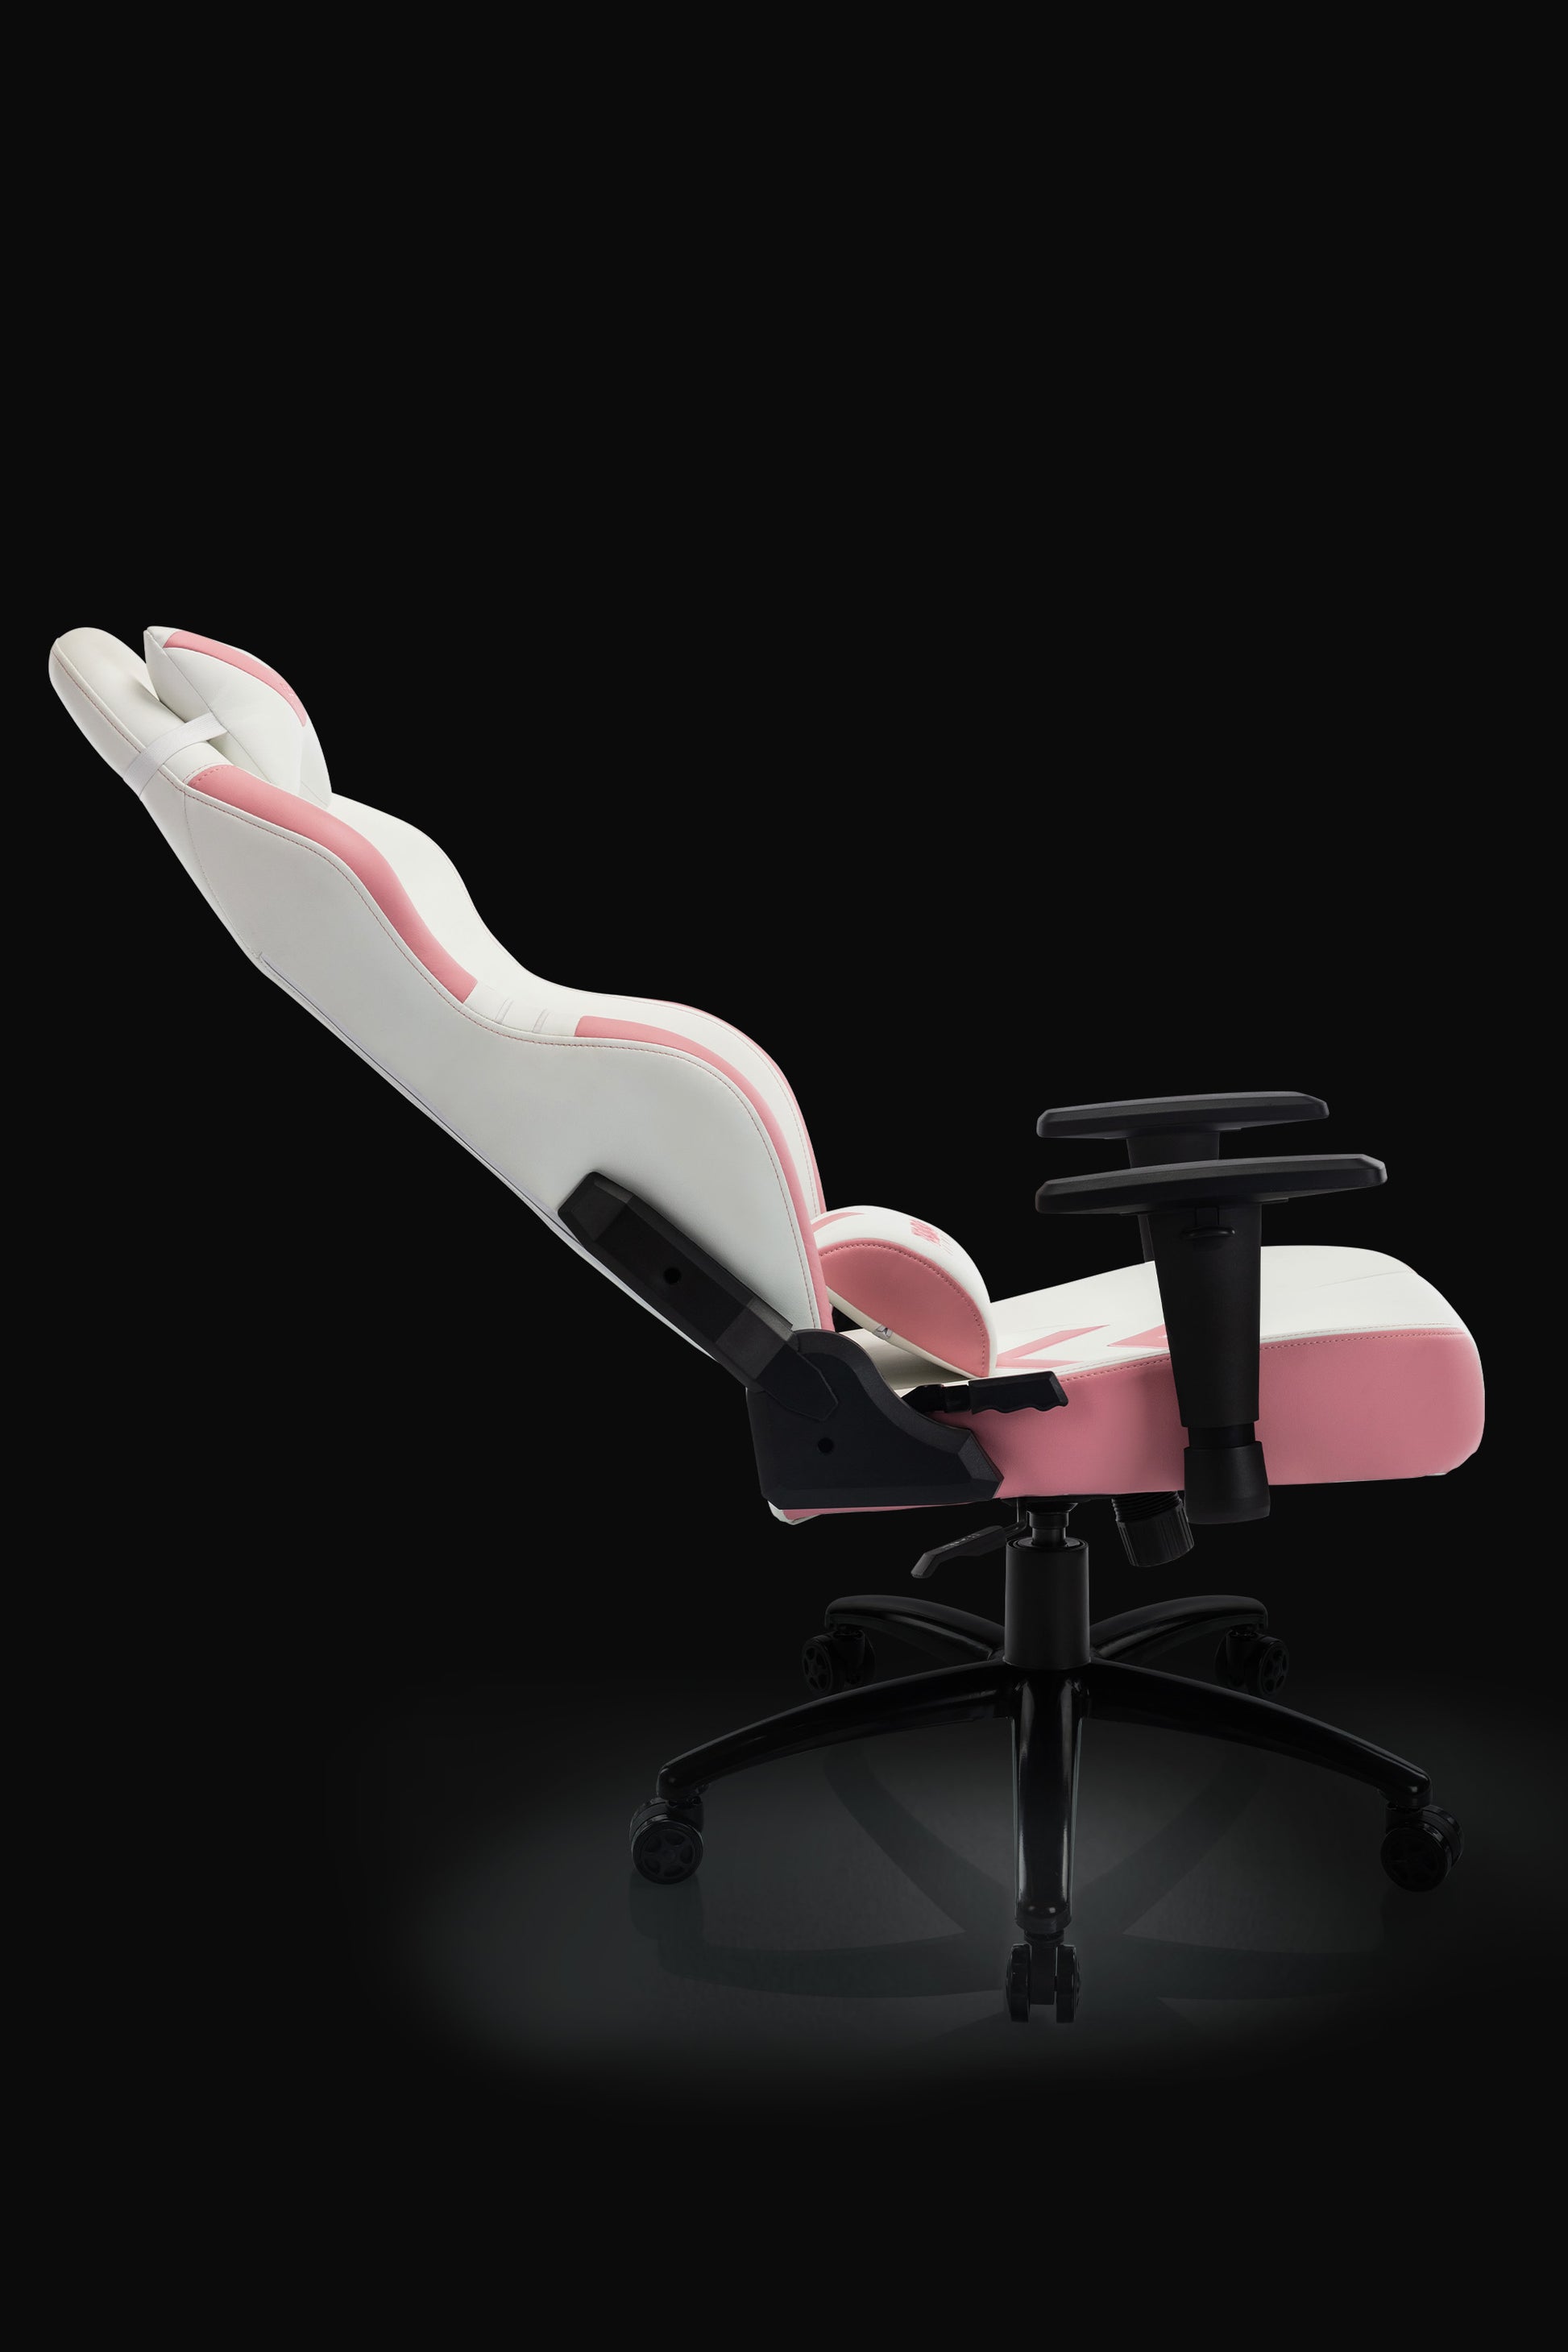 FUQIDO reclining gaming chair 1325 series white and pink#color_pink